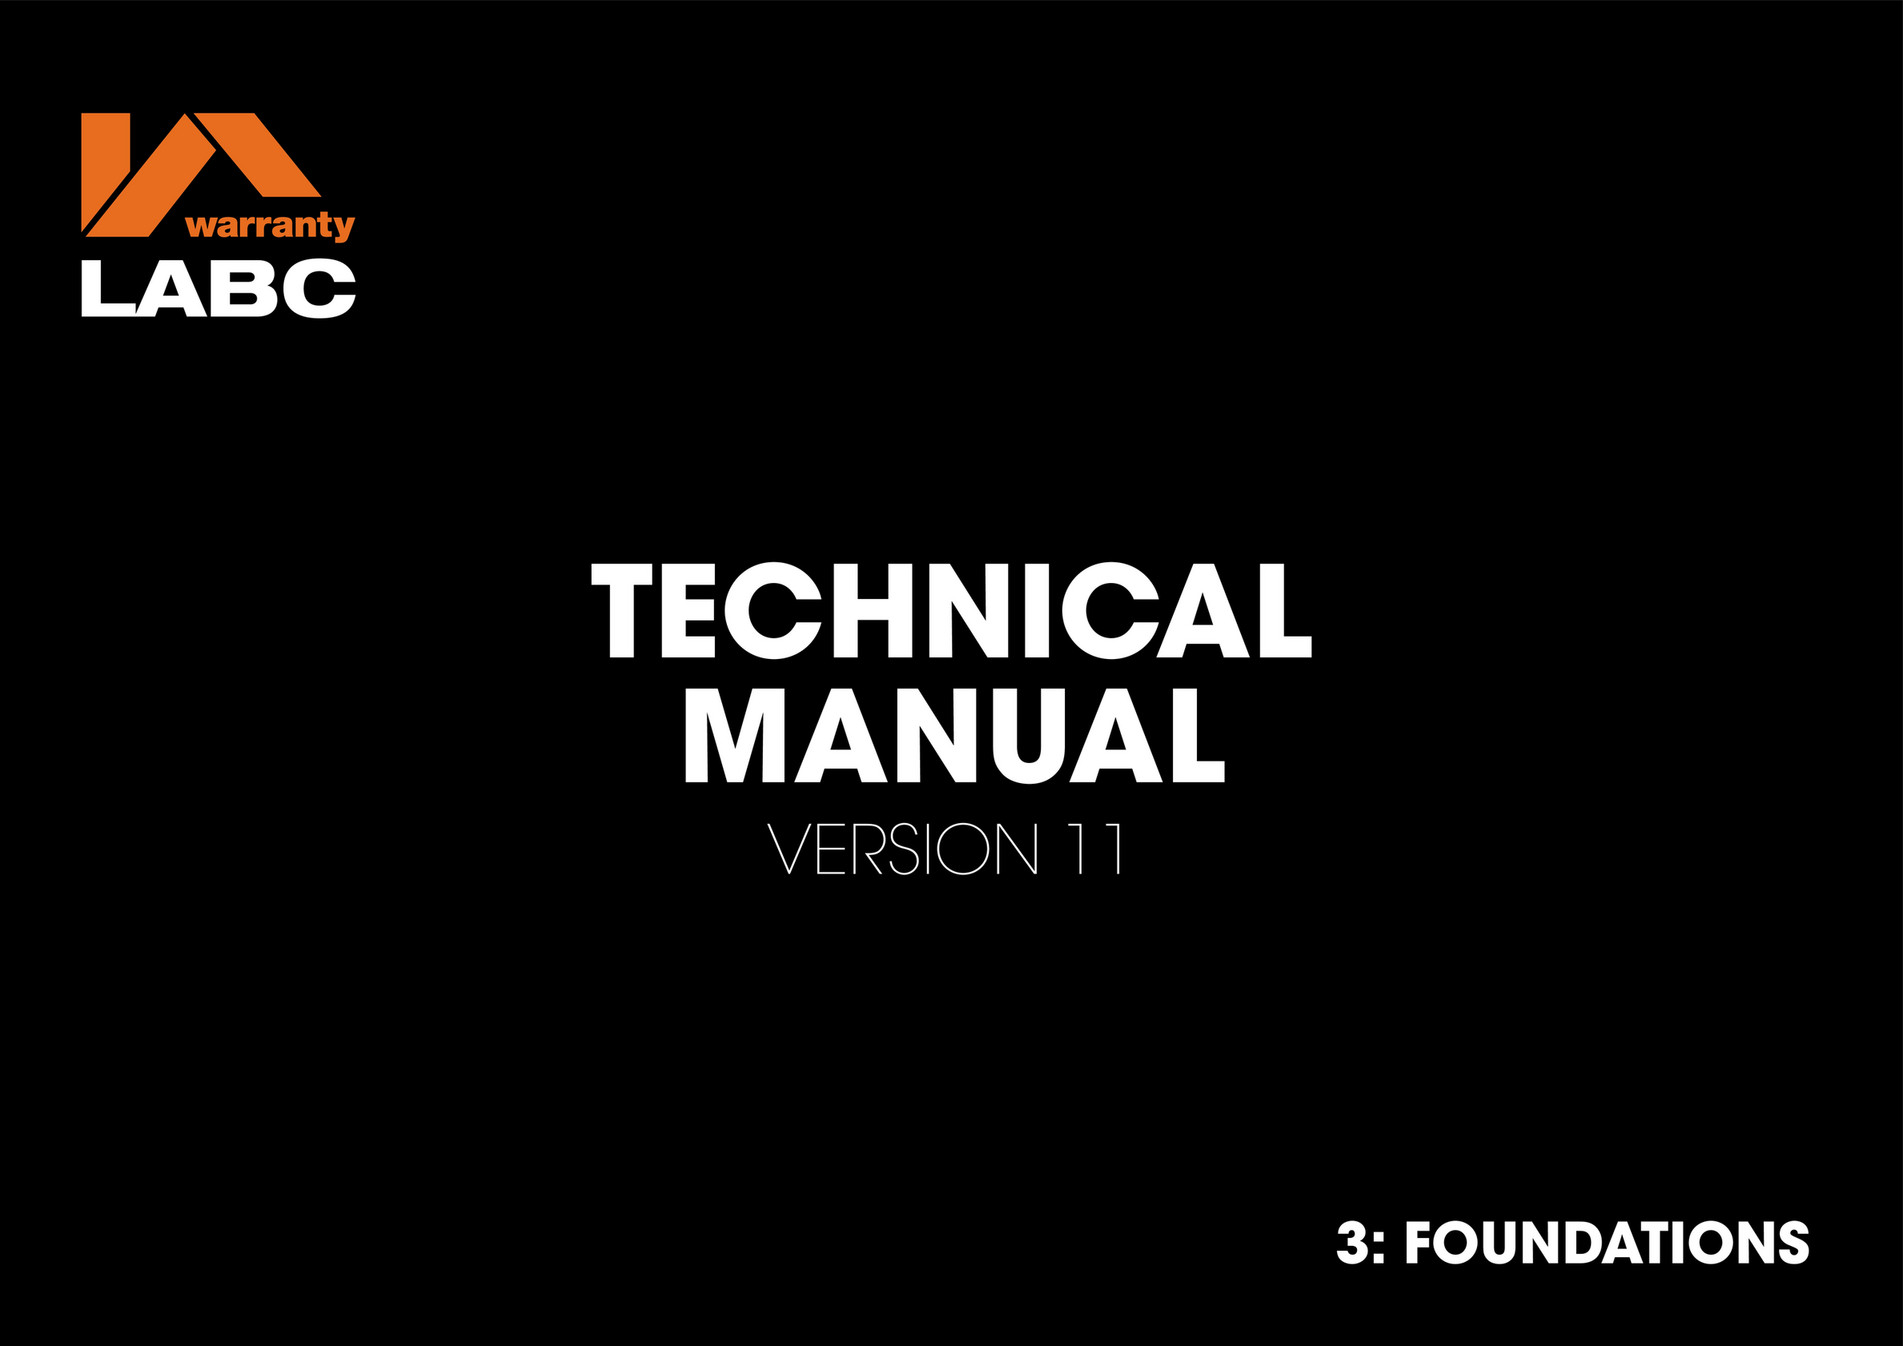 Labc Warranty Technical Manual V11 Section 3 Foundations Page 6